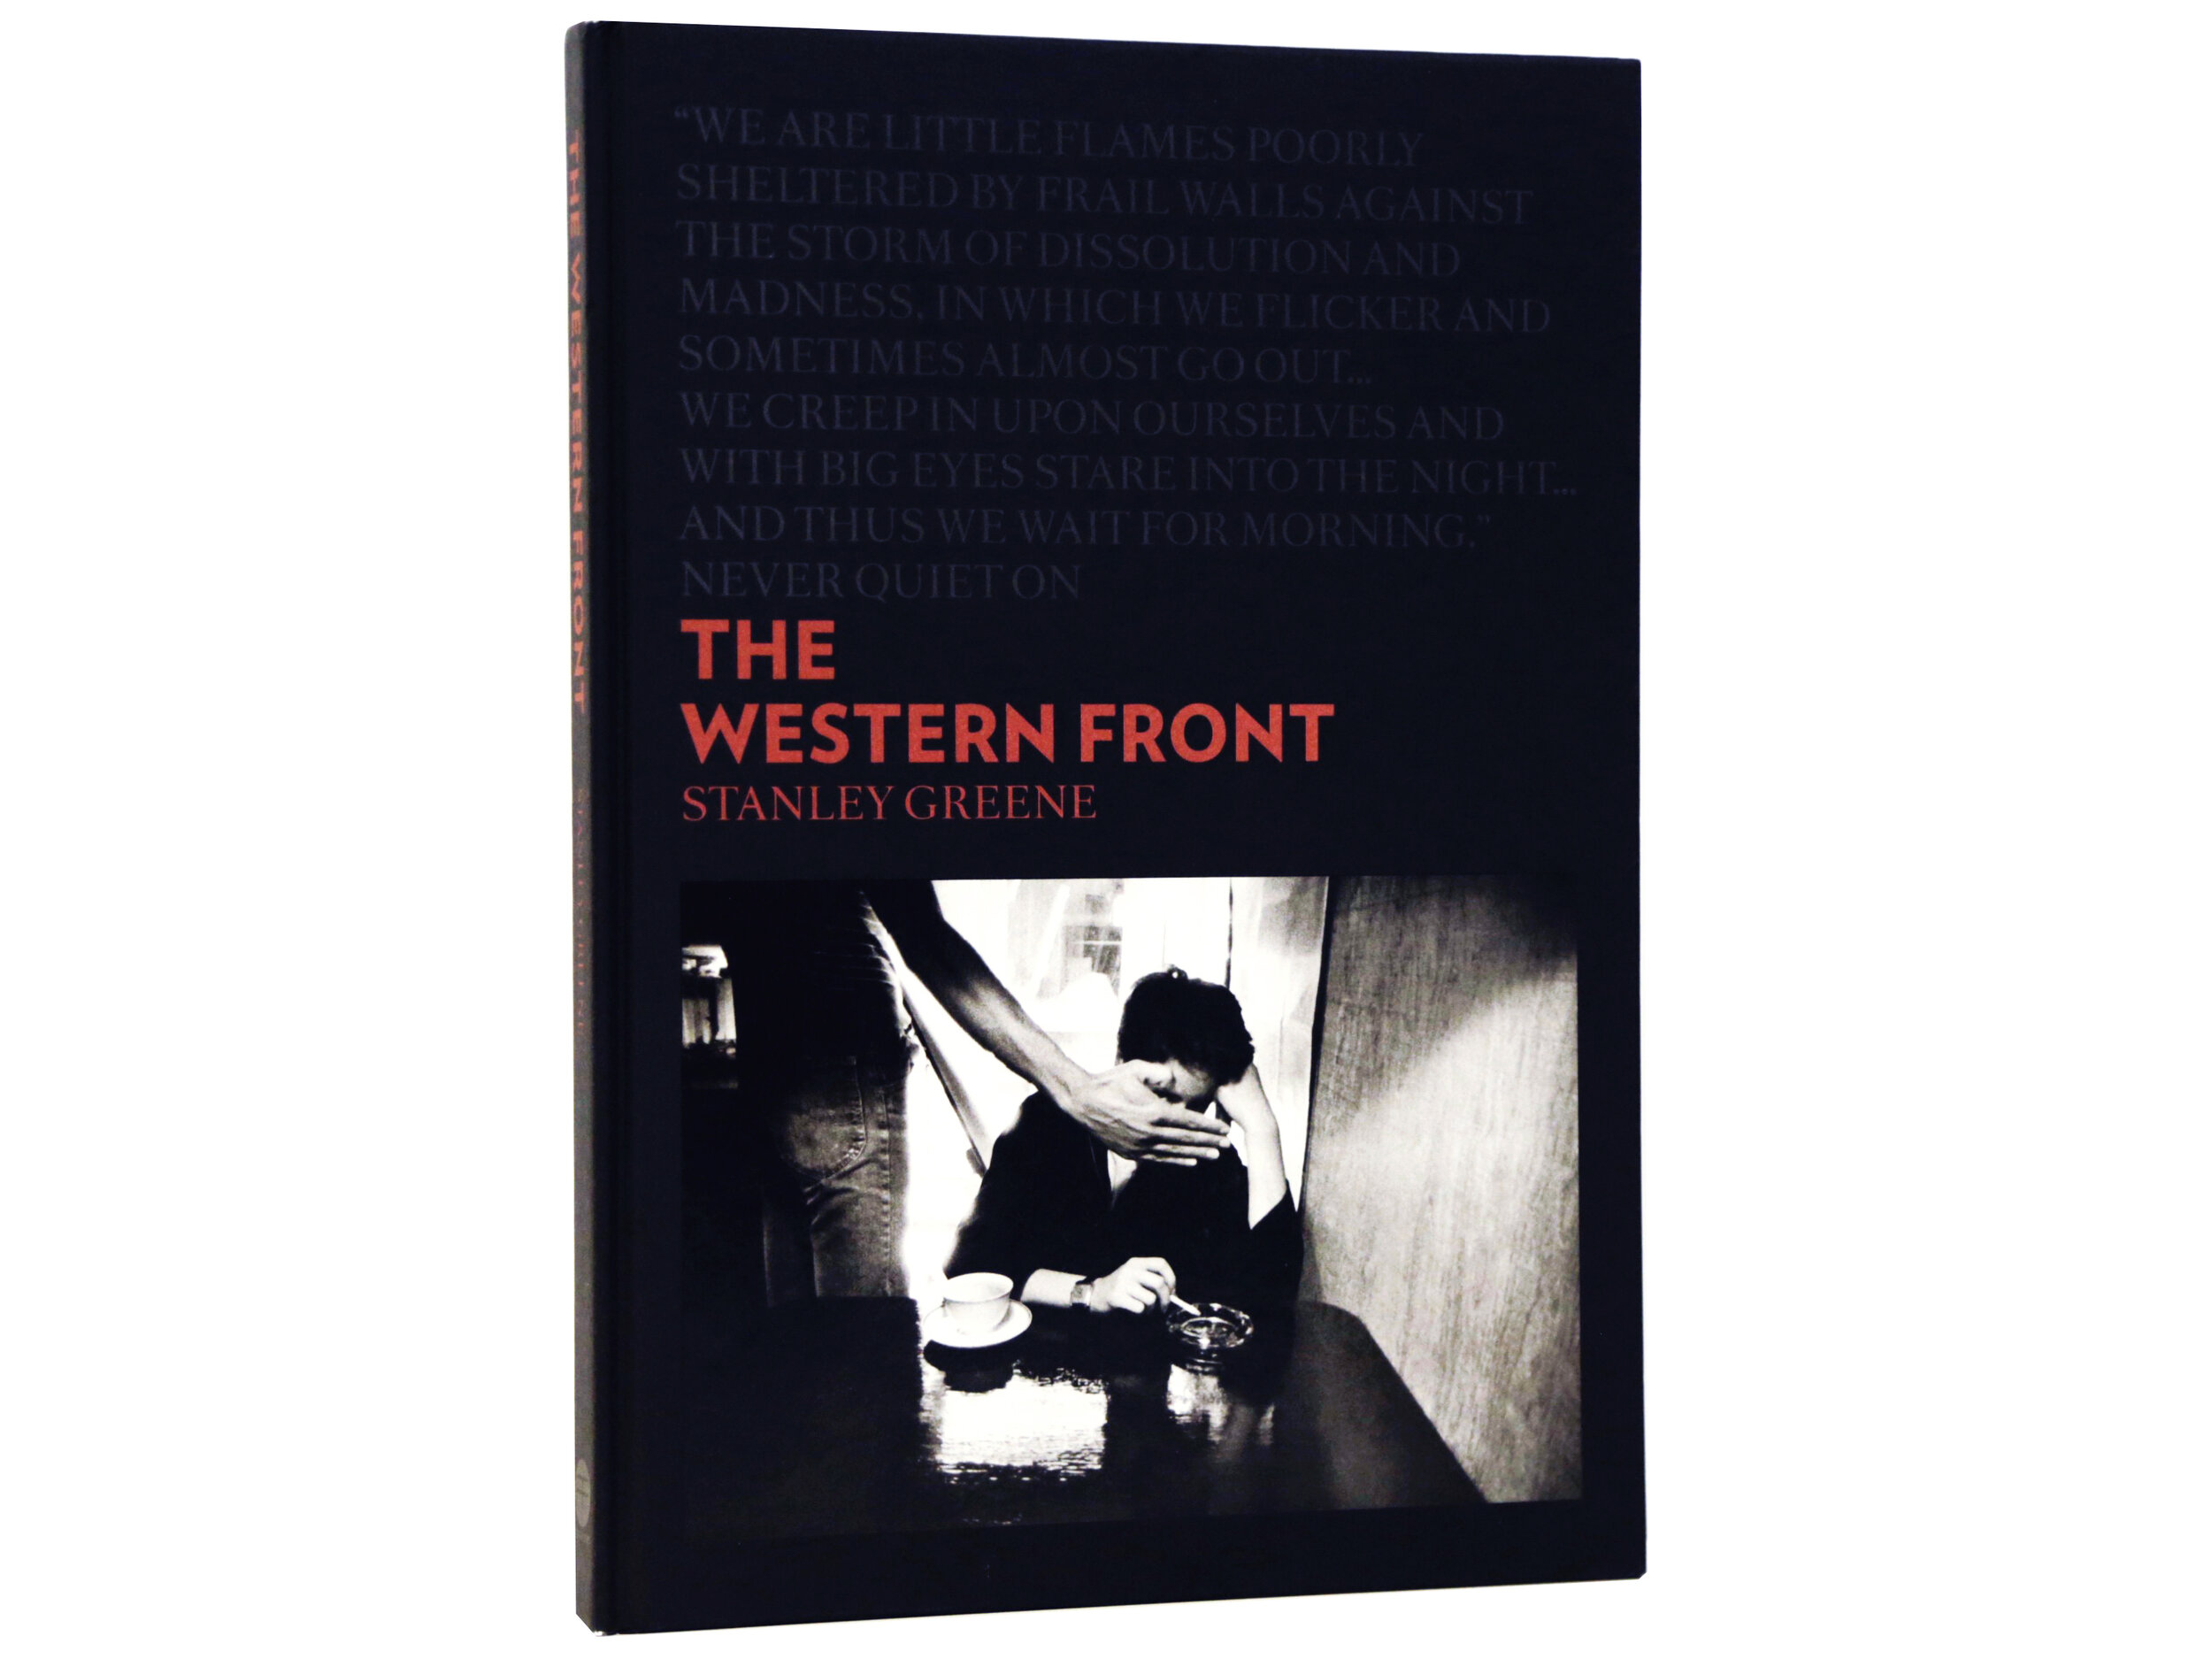 Never Quiet) on the Western Front - Photographs by Stanley Greene